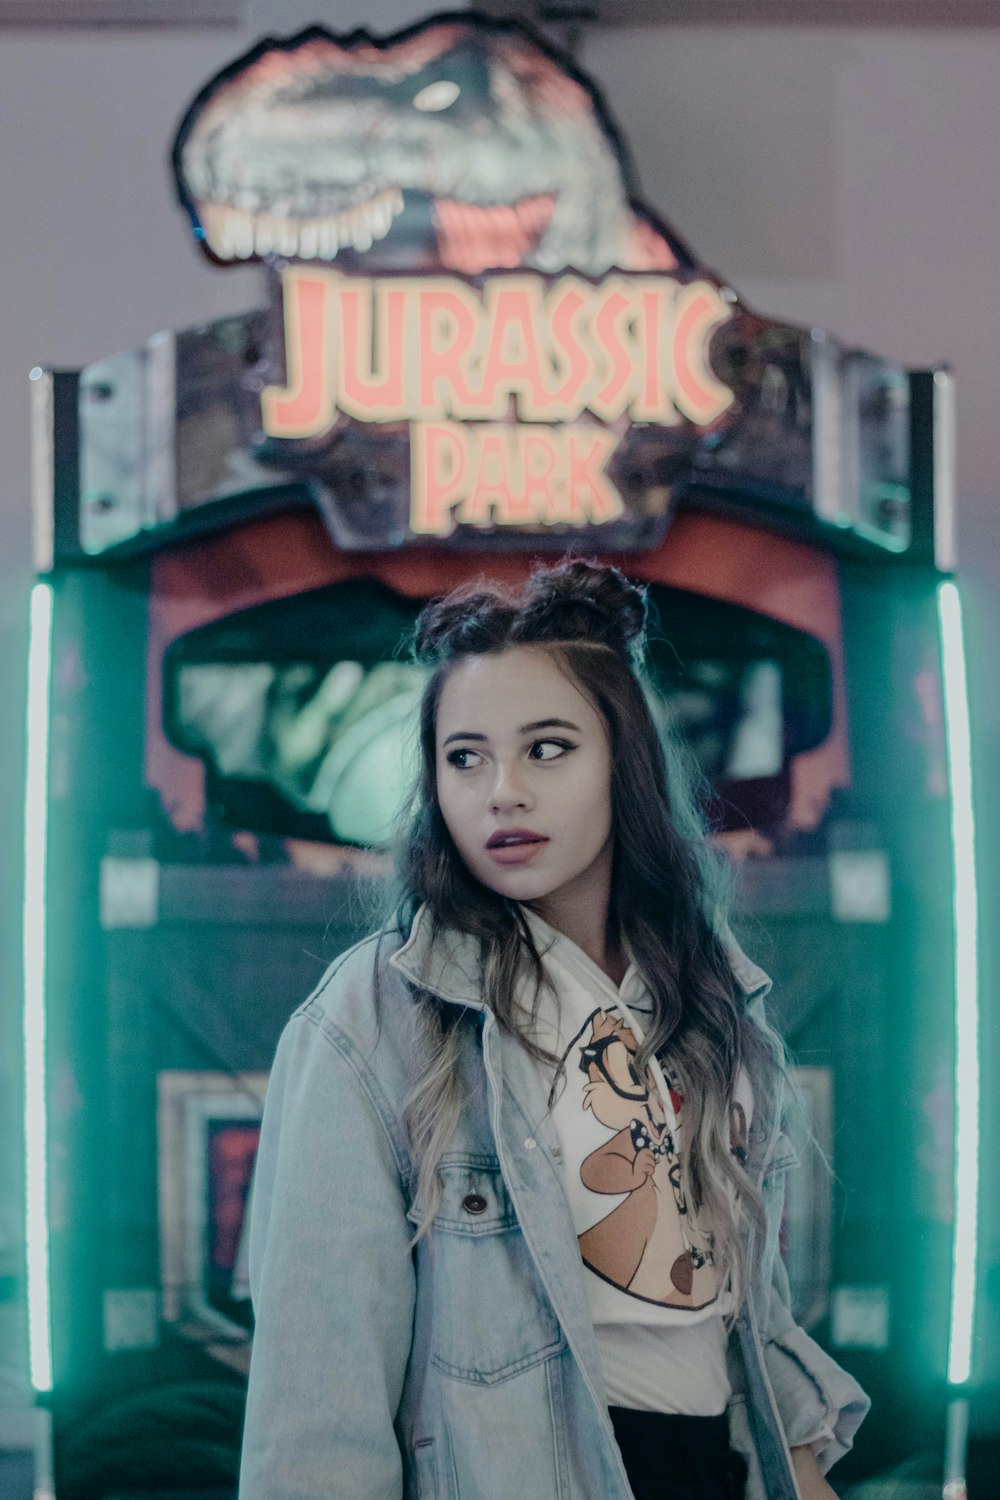 woman standing in front of Jurassic Park arcade game machine